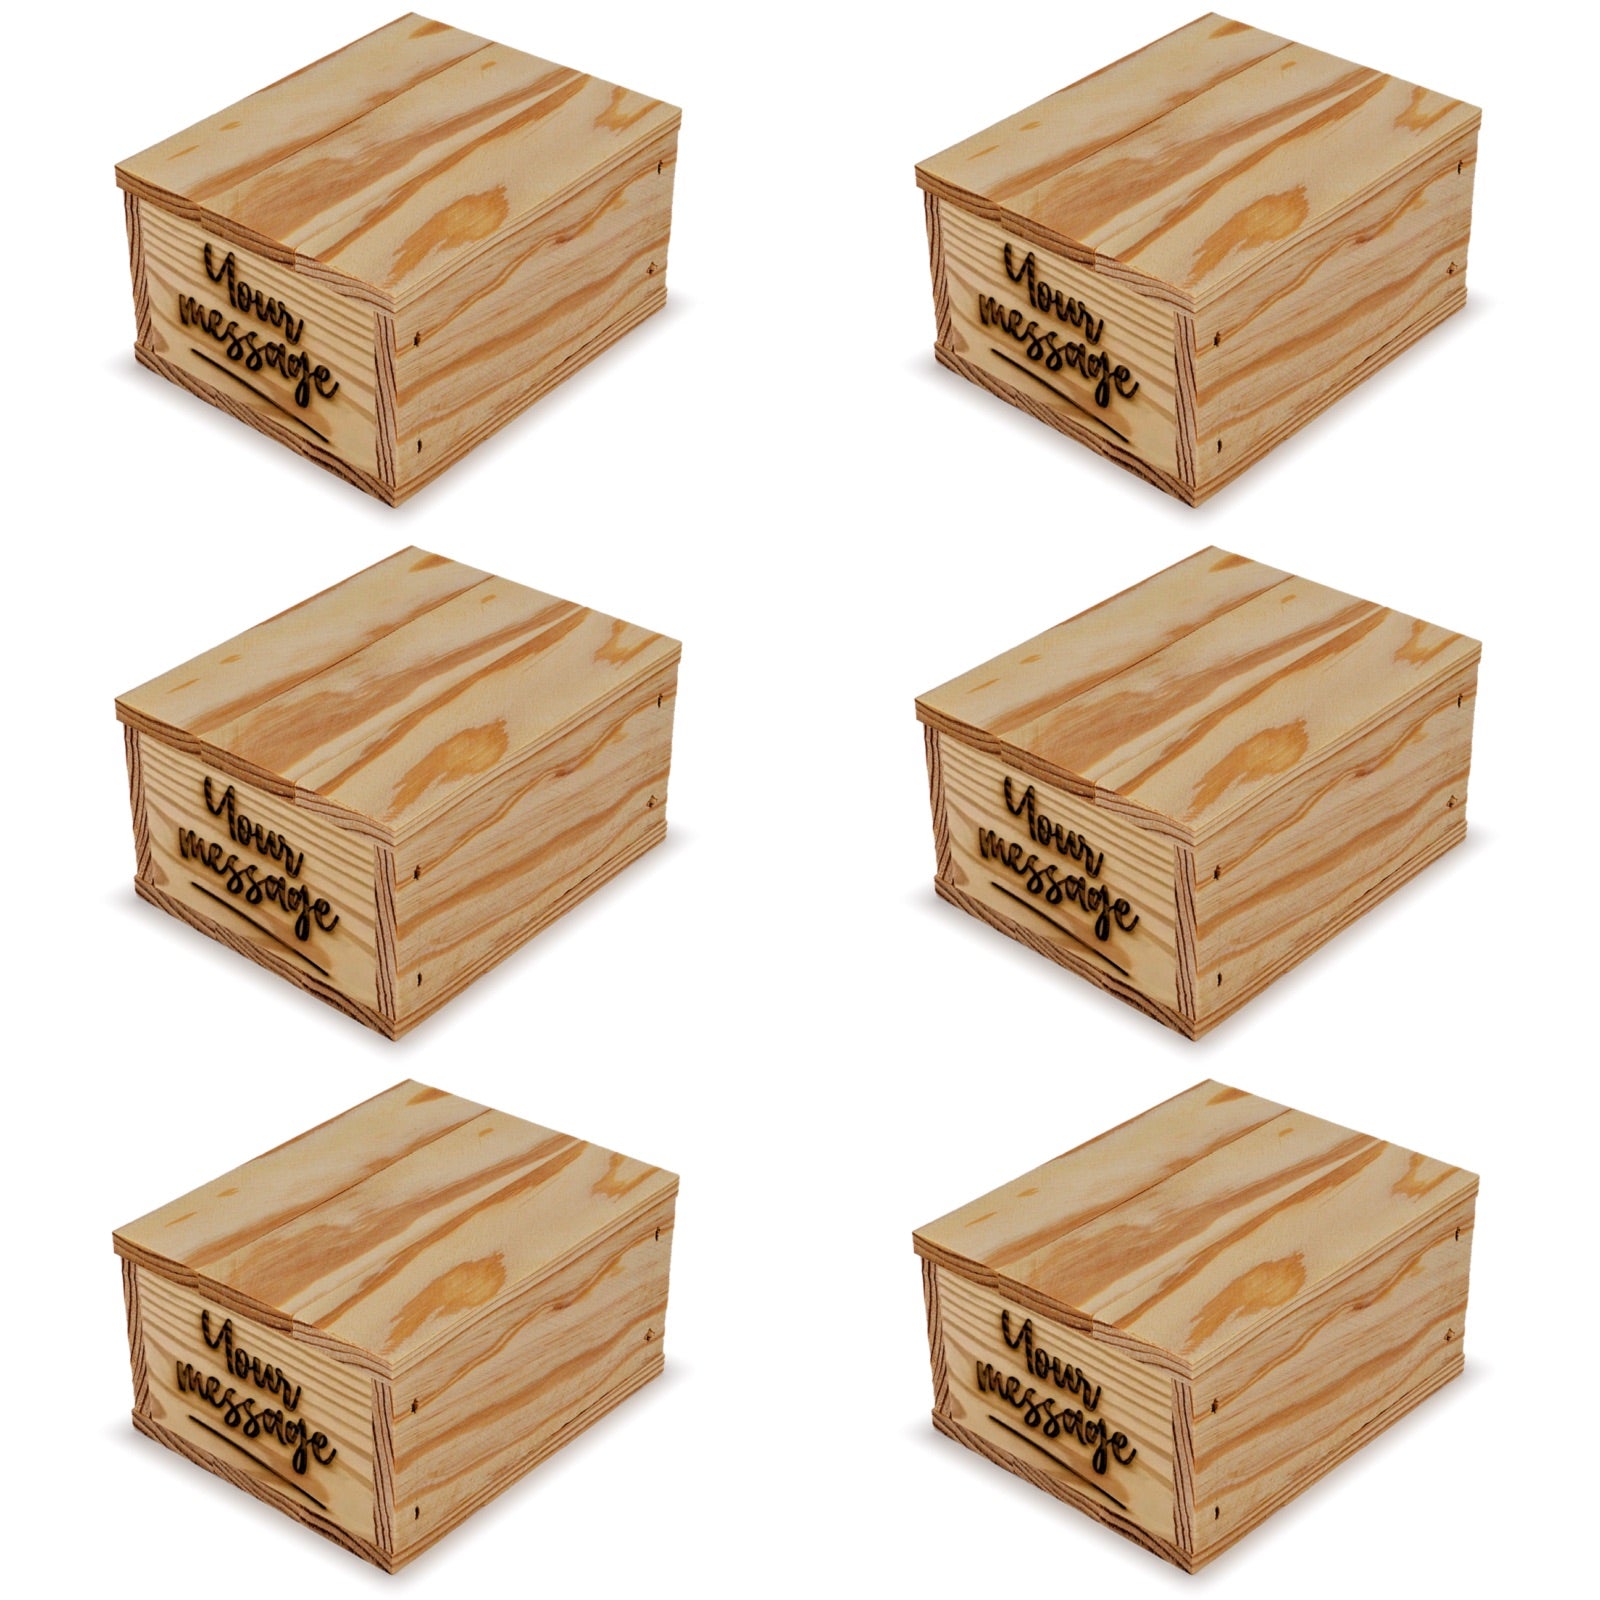 6 Small wooden crates with lid and custom message 5x4.5x2.75